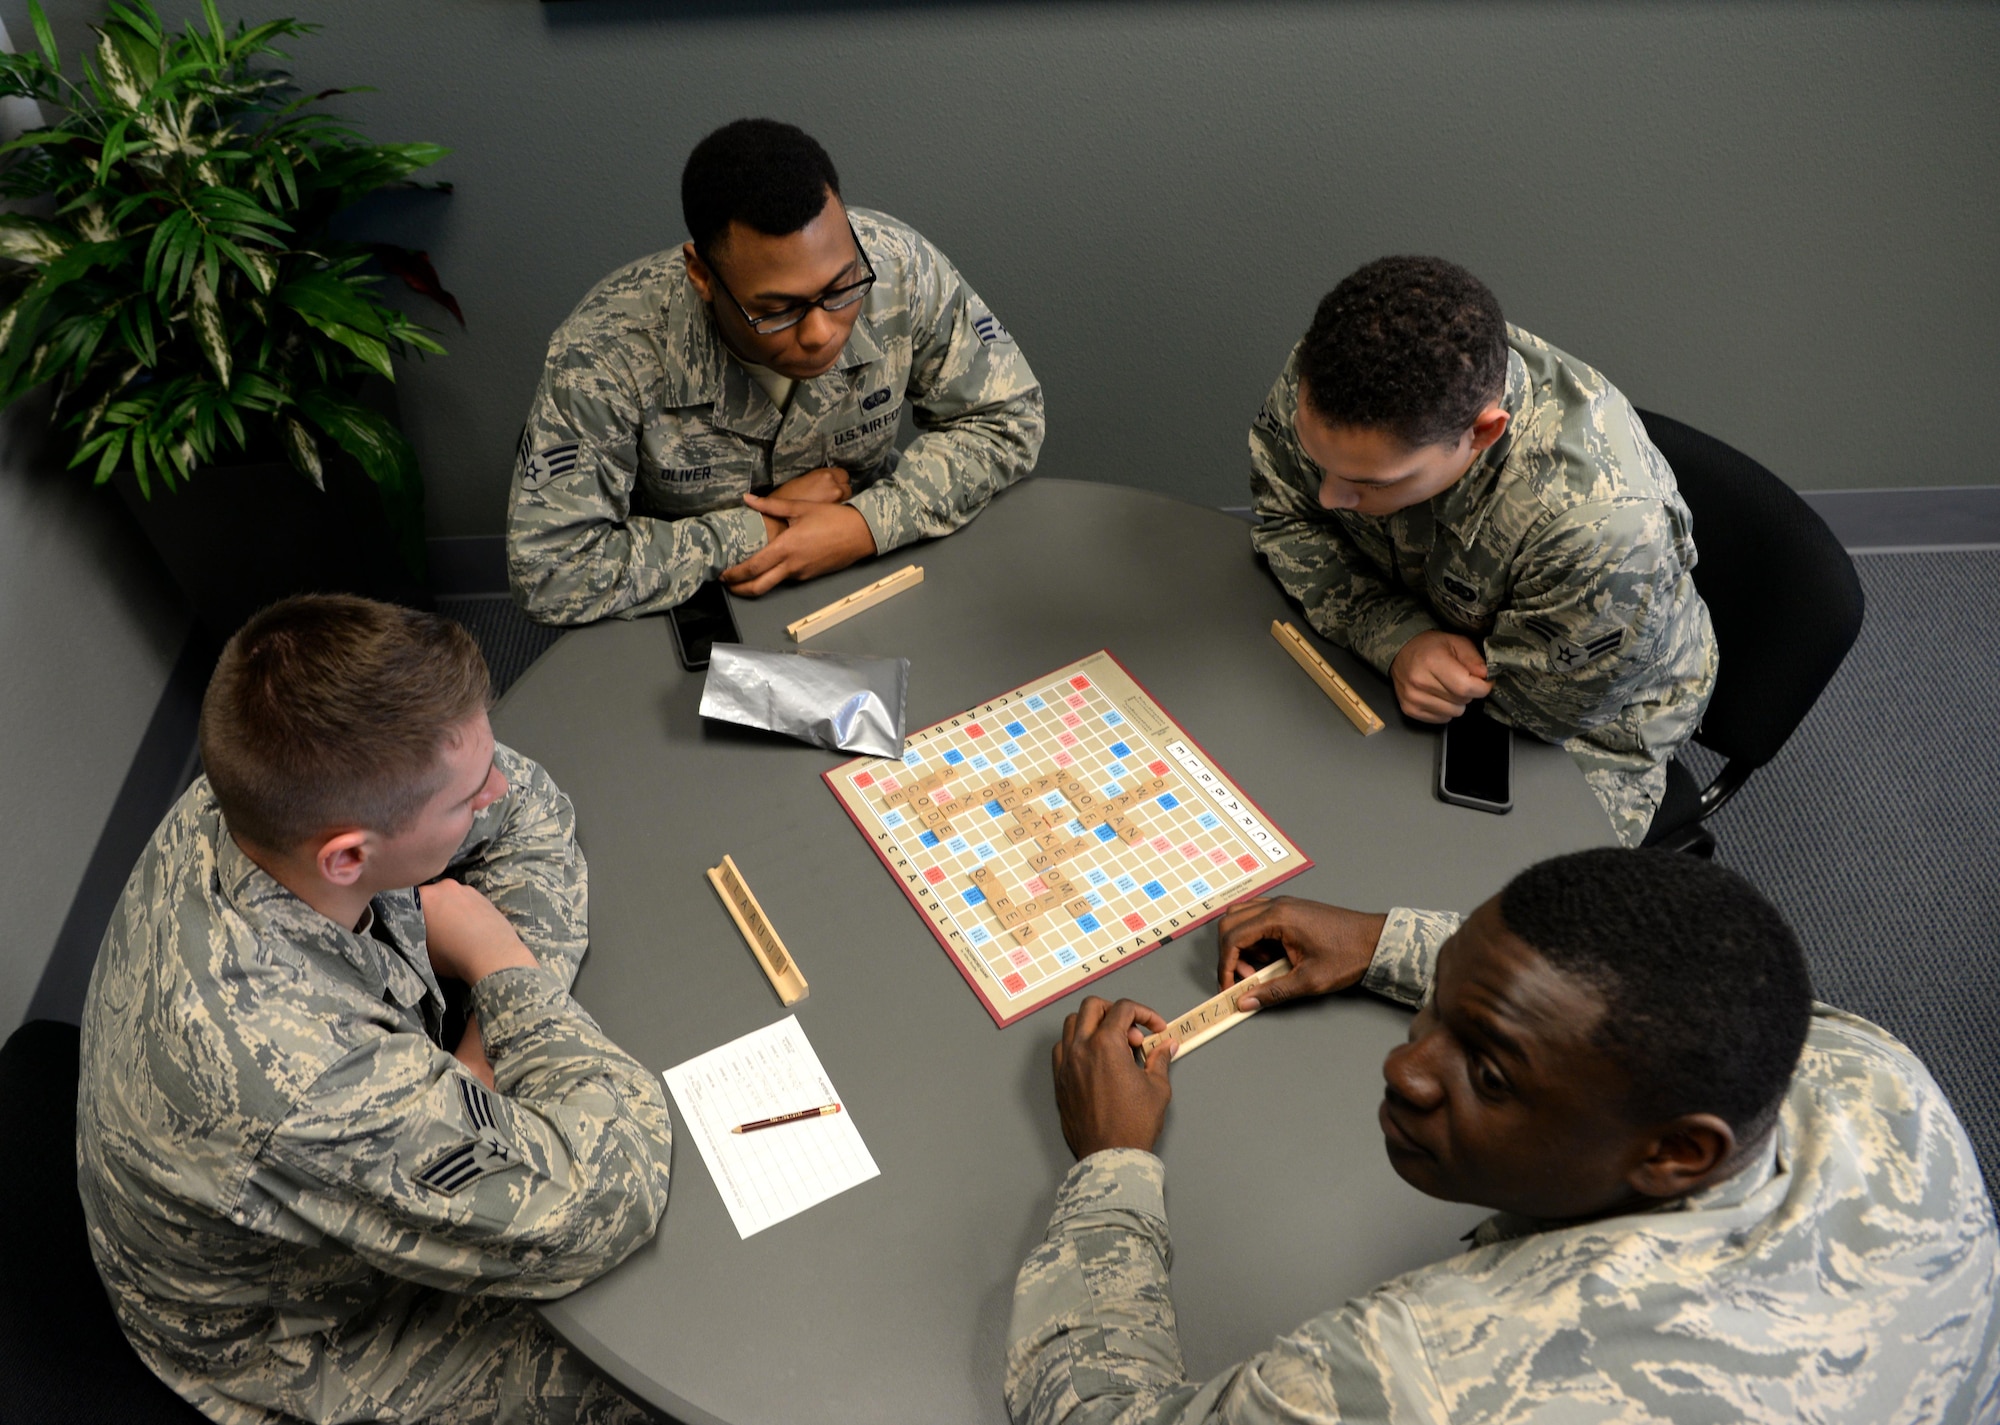 Airmen participate in a game of scrabble at the California CAfé at the Beale Community Activity Center, Feb. 3, 2017, at Beale Air Force Base, California. The CAFé lounge also offers free coffee, Wi-Fi, and a full surround sound projection screen. (U.S. Air Force photo/ Staff Sgt. Bobby Cummings)